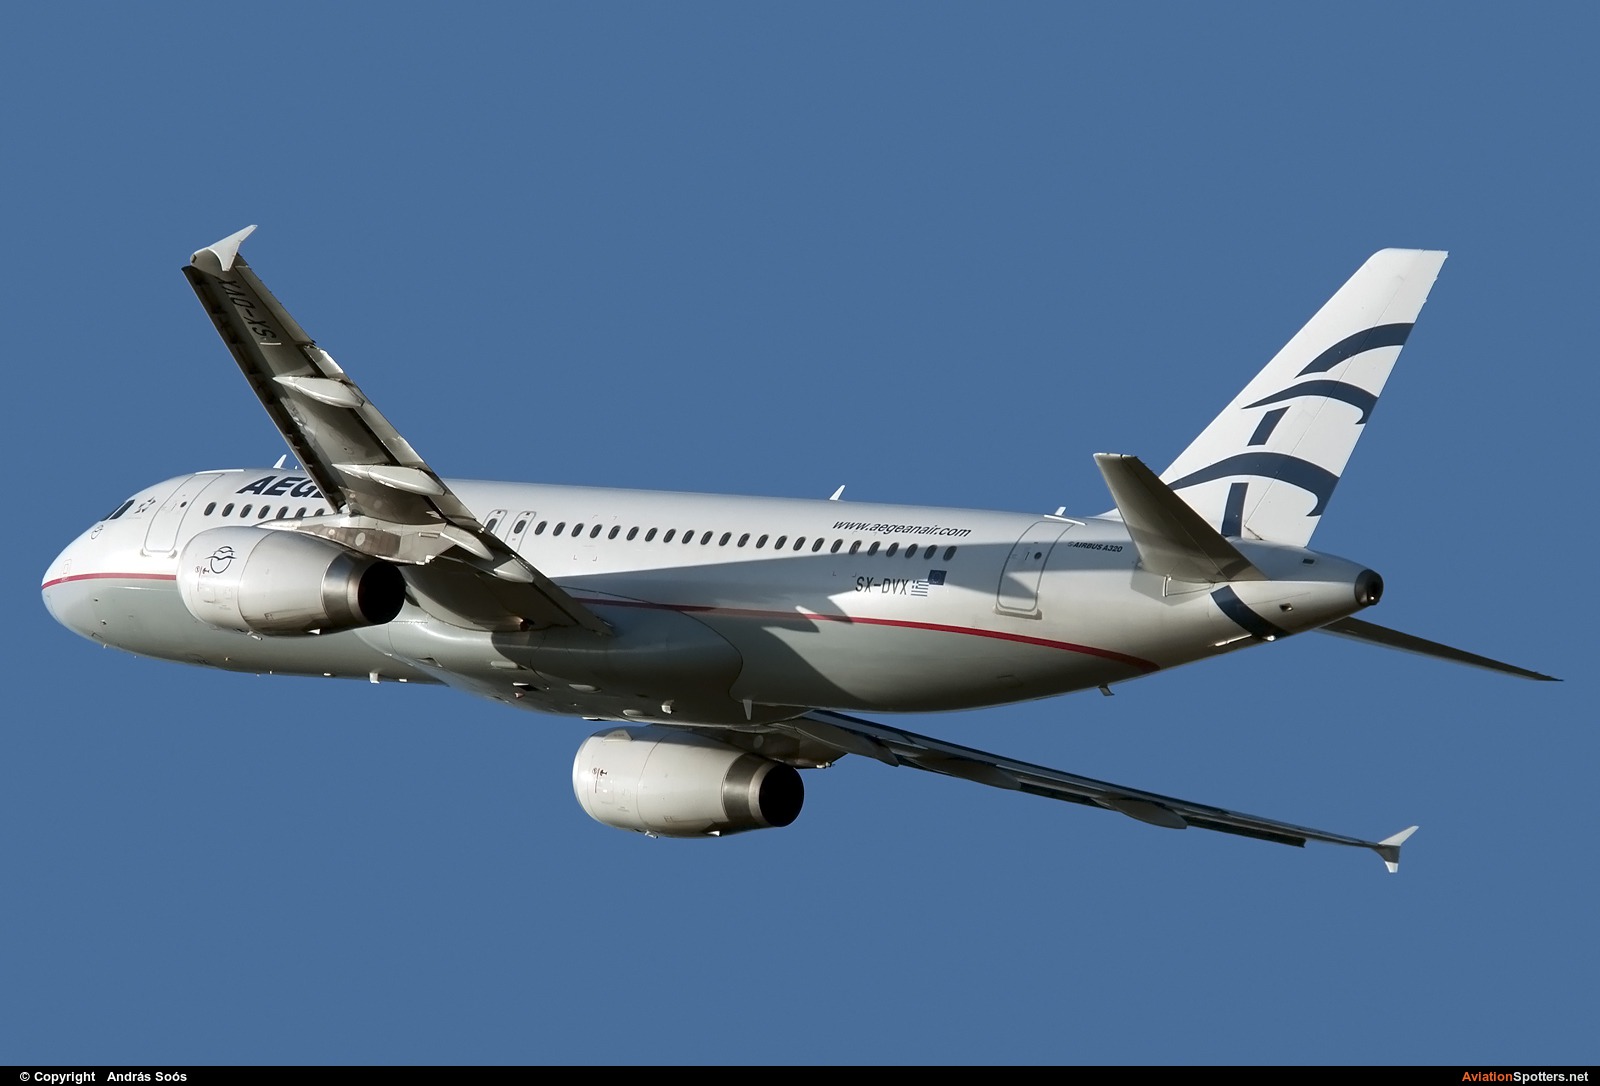 Aegean Airlines  -  A320-232  (SX-DVX) By András Soós (sas1965)